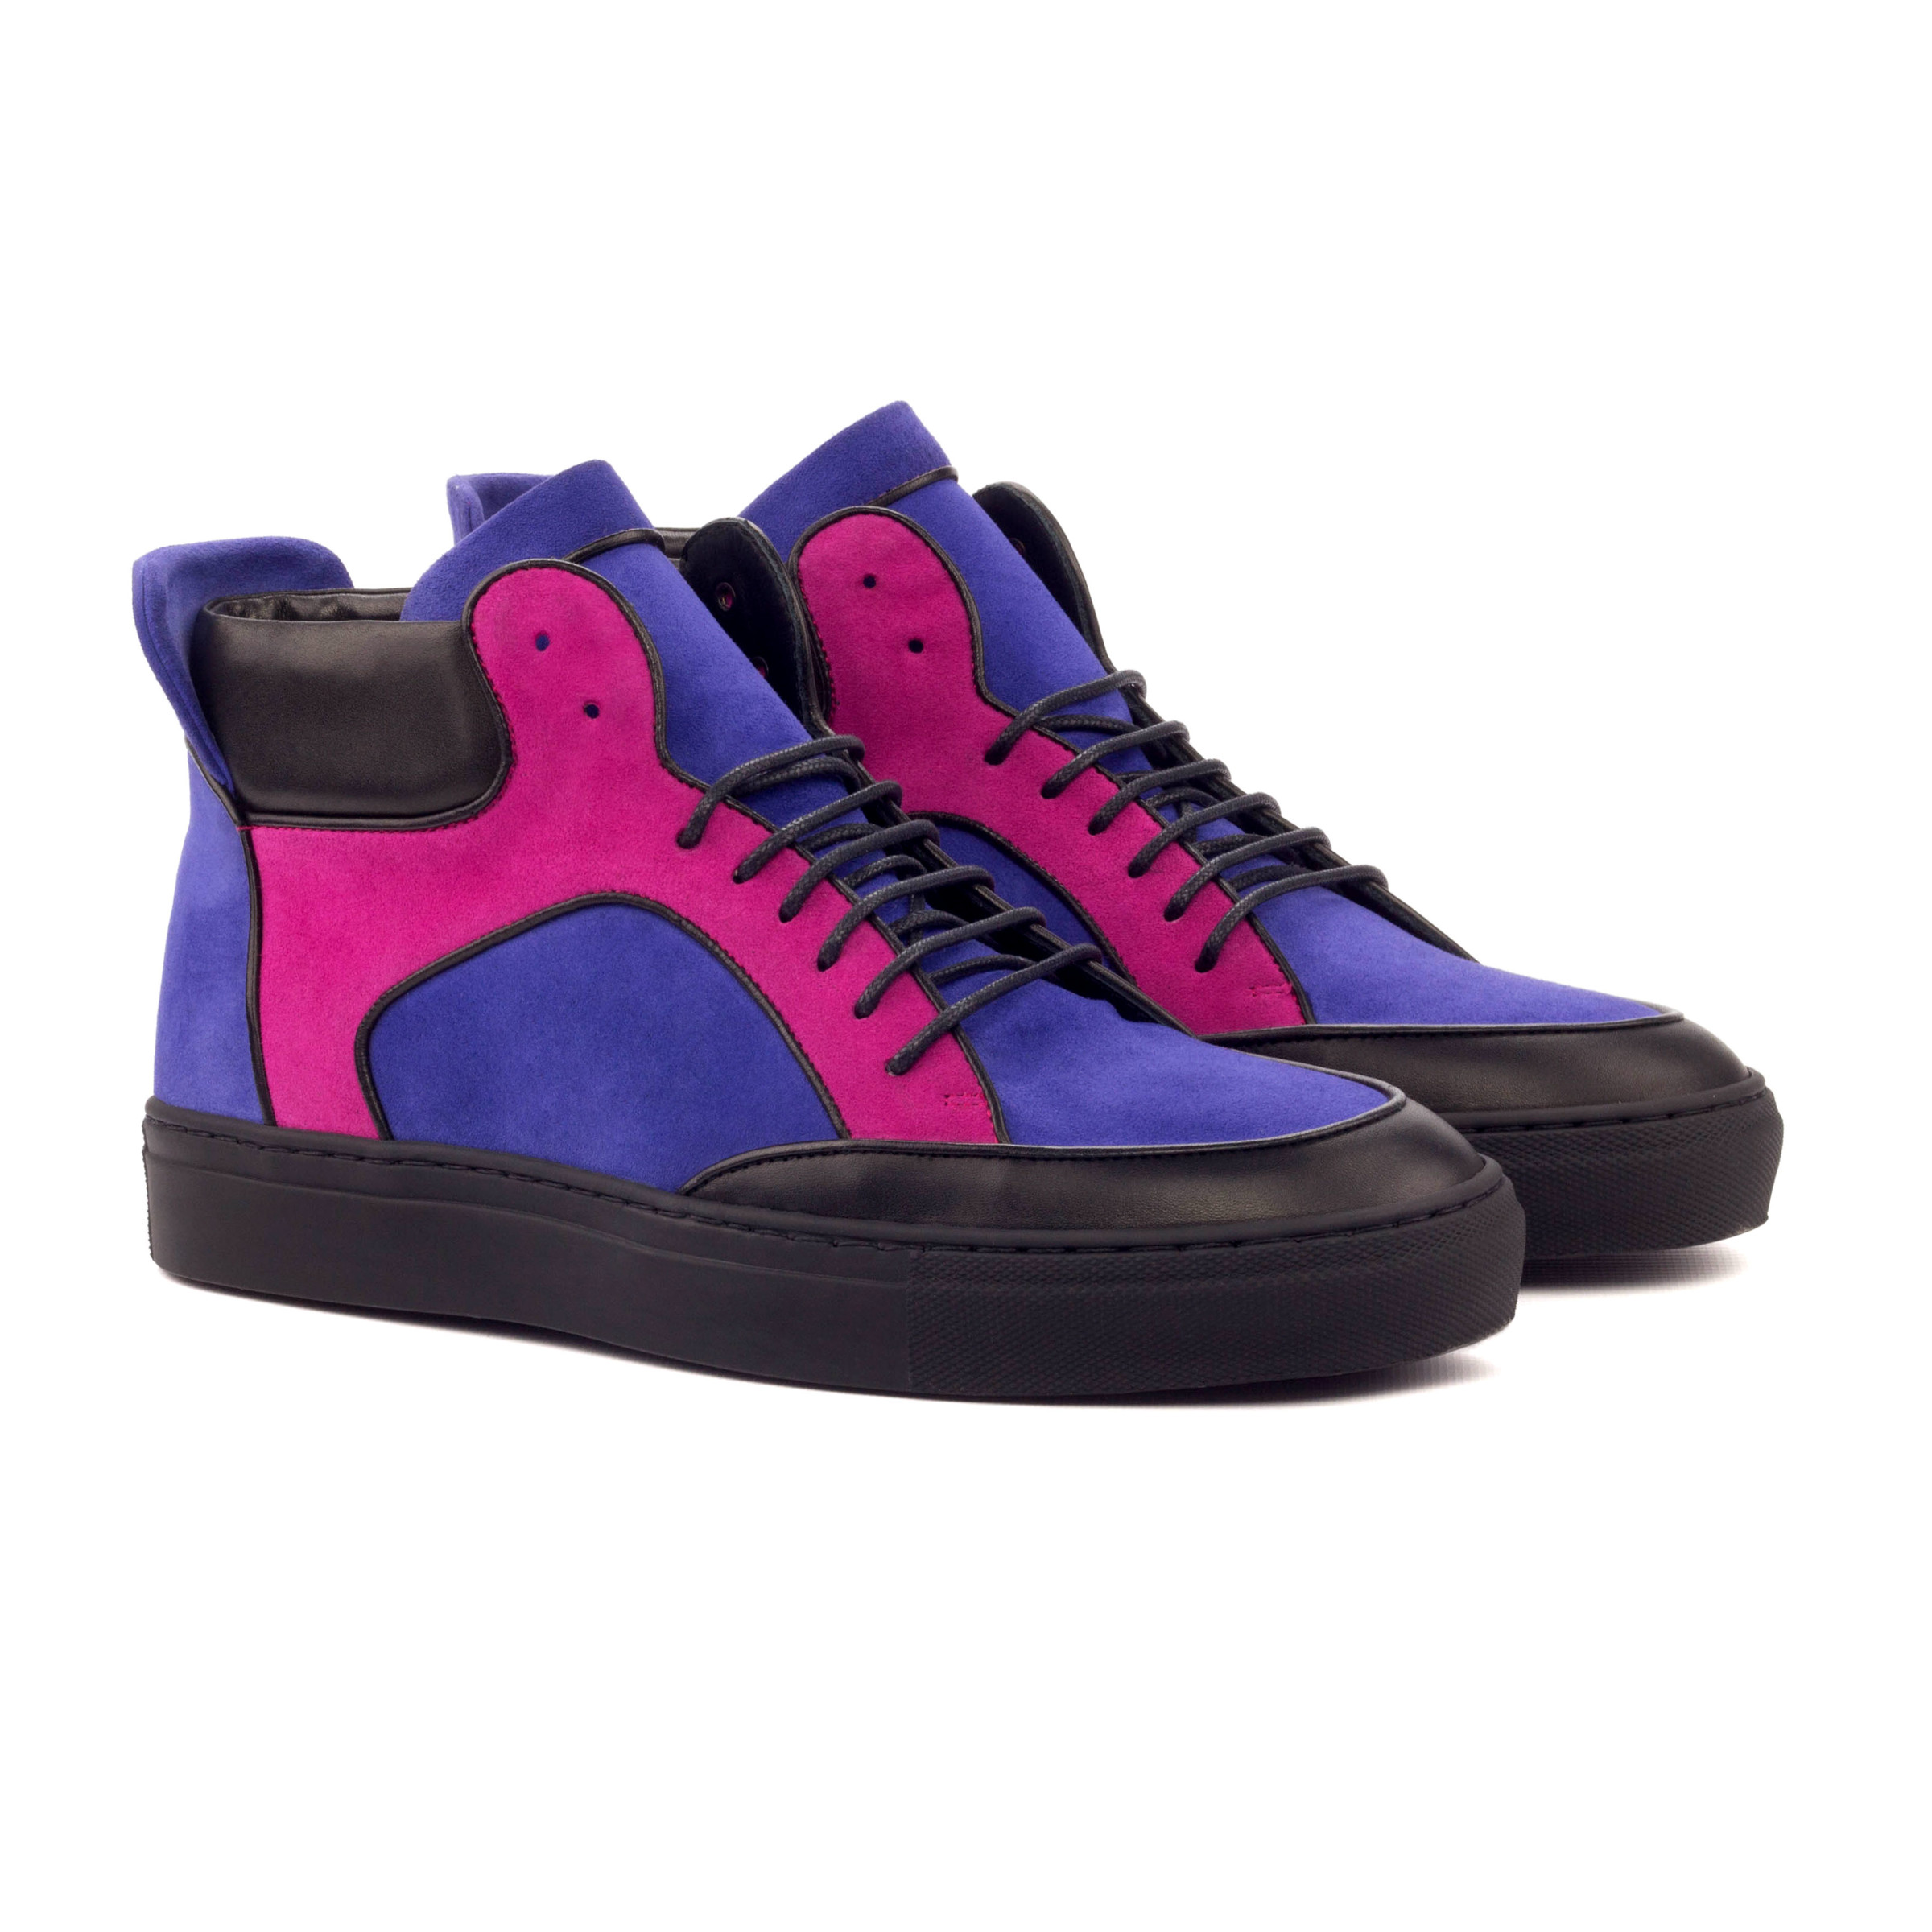 The High Top: Electric Vintage. Front side view of black calf leather, black box calf, purple kid suede, fuchsia kid suede, black painted calf leather sneaker style shoes with black soles on a white background